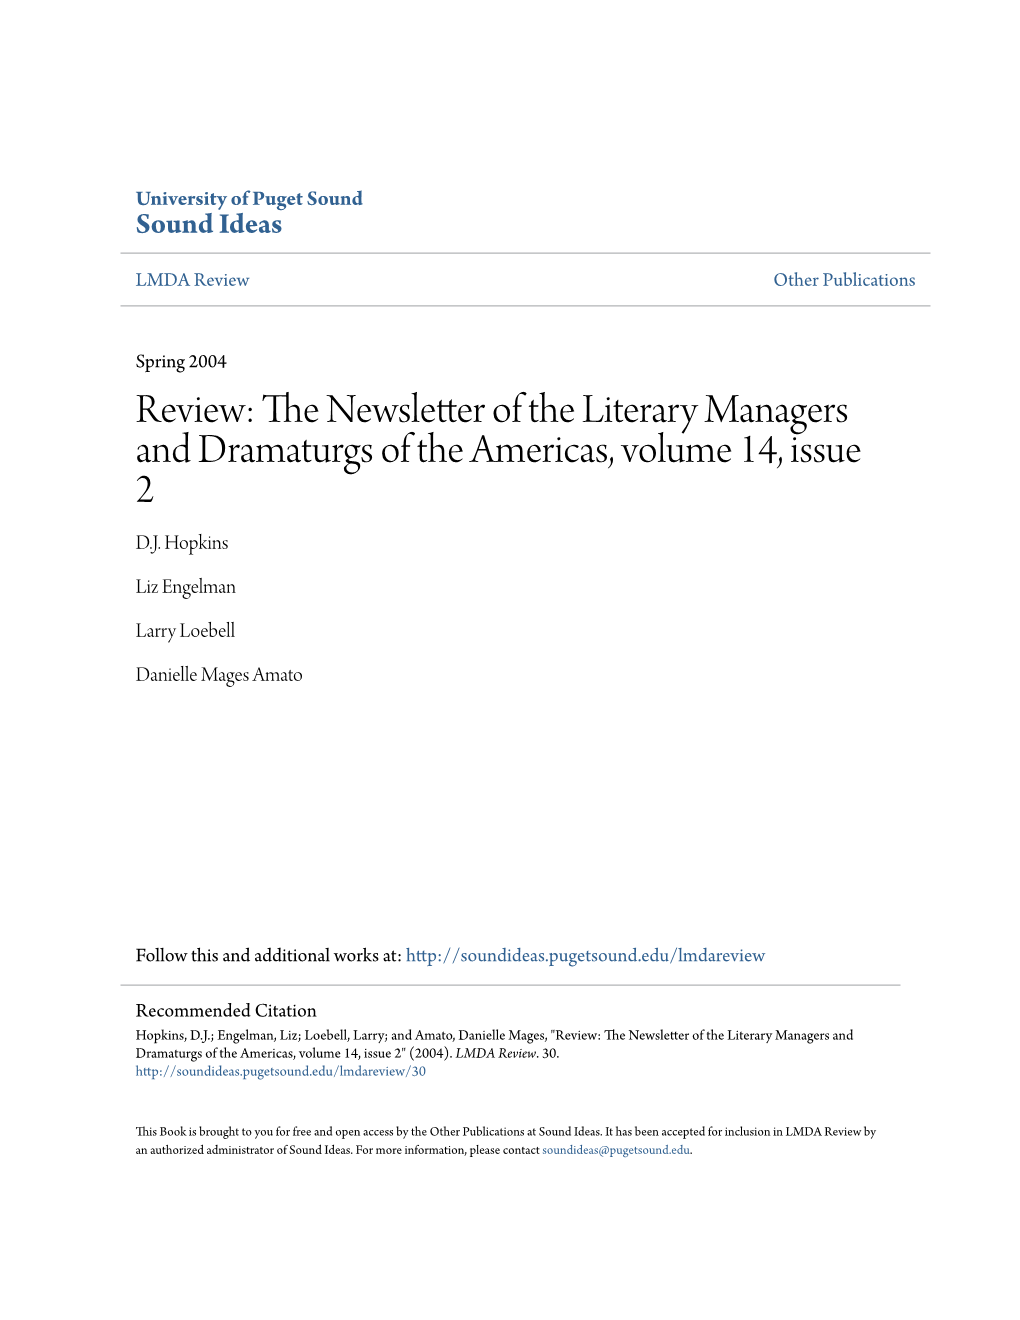 Review: the Newsletter of the Literary Managers And